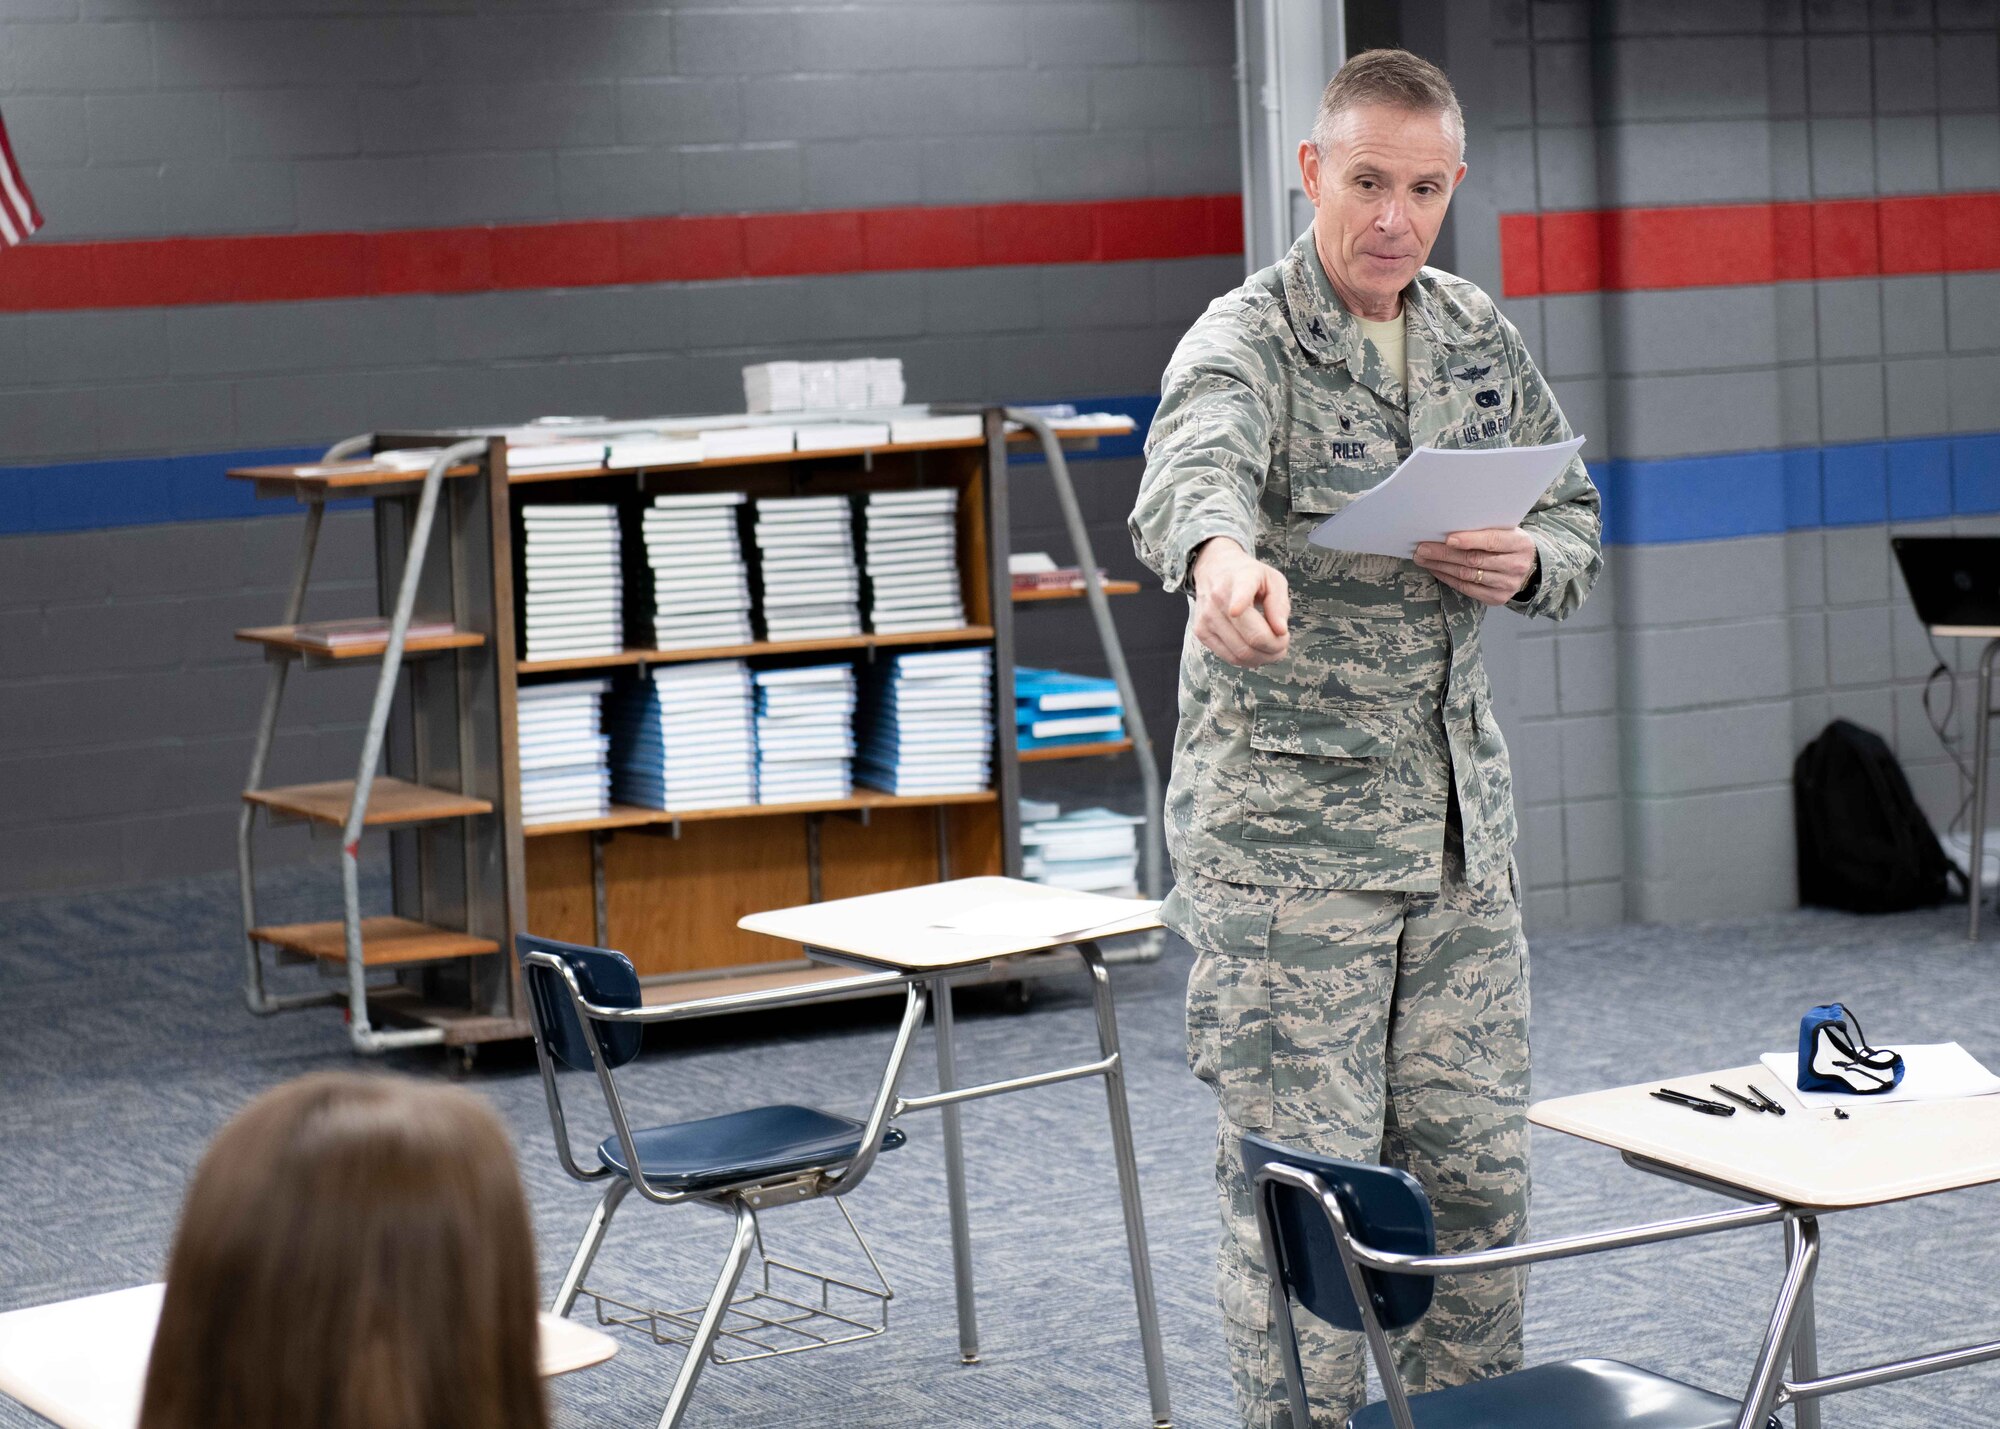 Youngstown Air Reserve Station showed its support for the new Air Force Junior Reserve Officers’ Training Corps program at Austintown Fitch High School by donating more than 70 Airman battle uniforms Jan. 11, 2021.